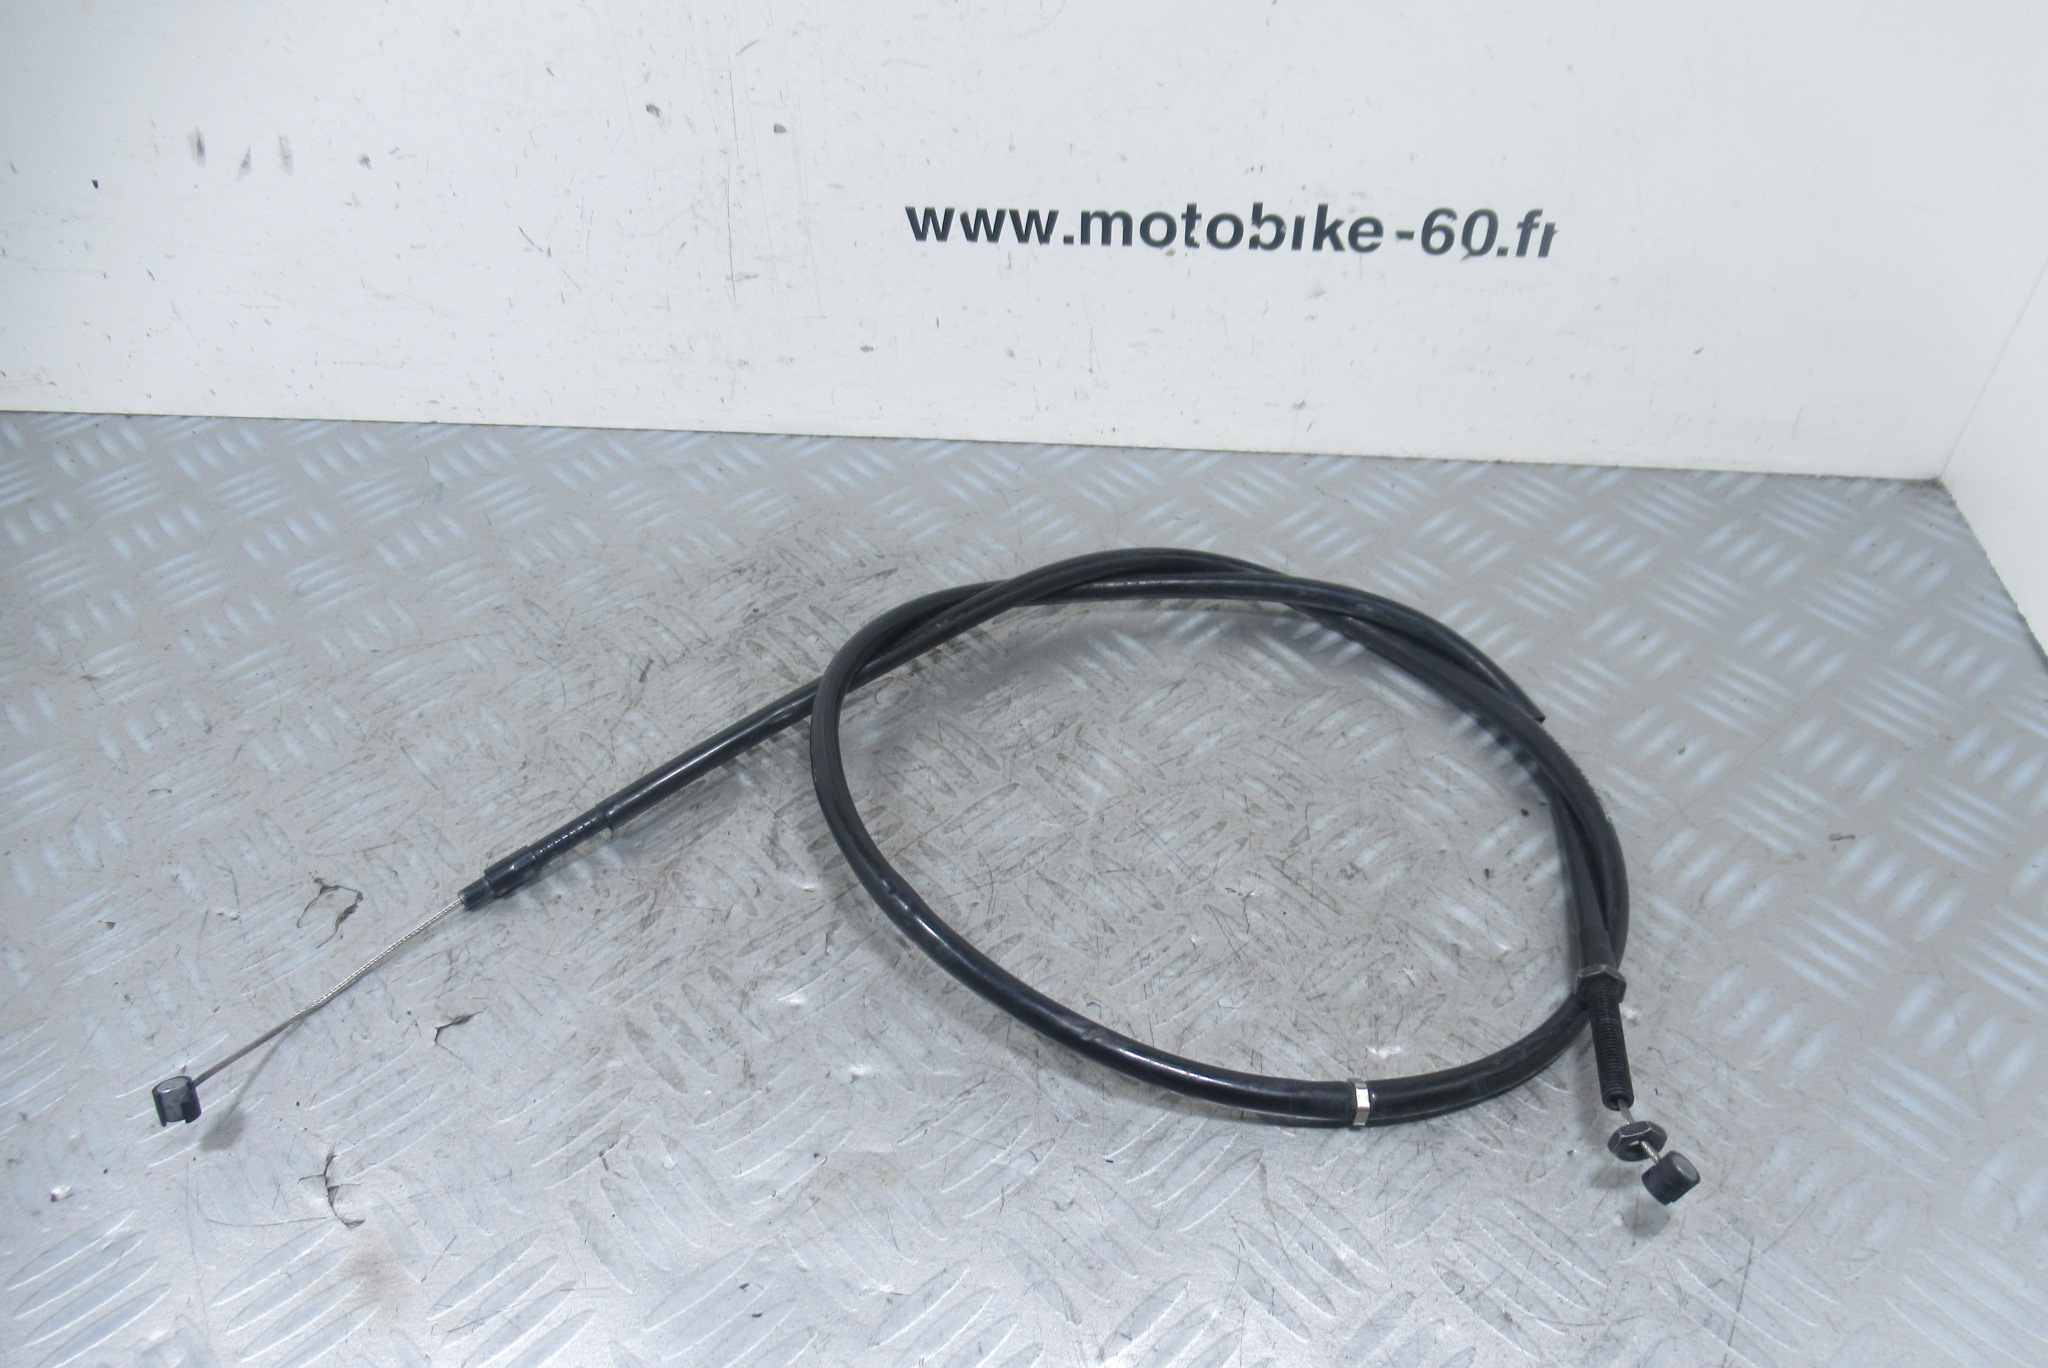 Cable embrayage BMW S1000RR 4t (8528803-01)